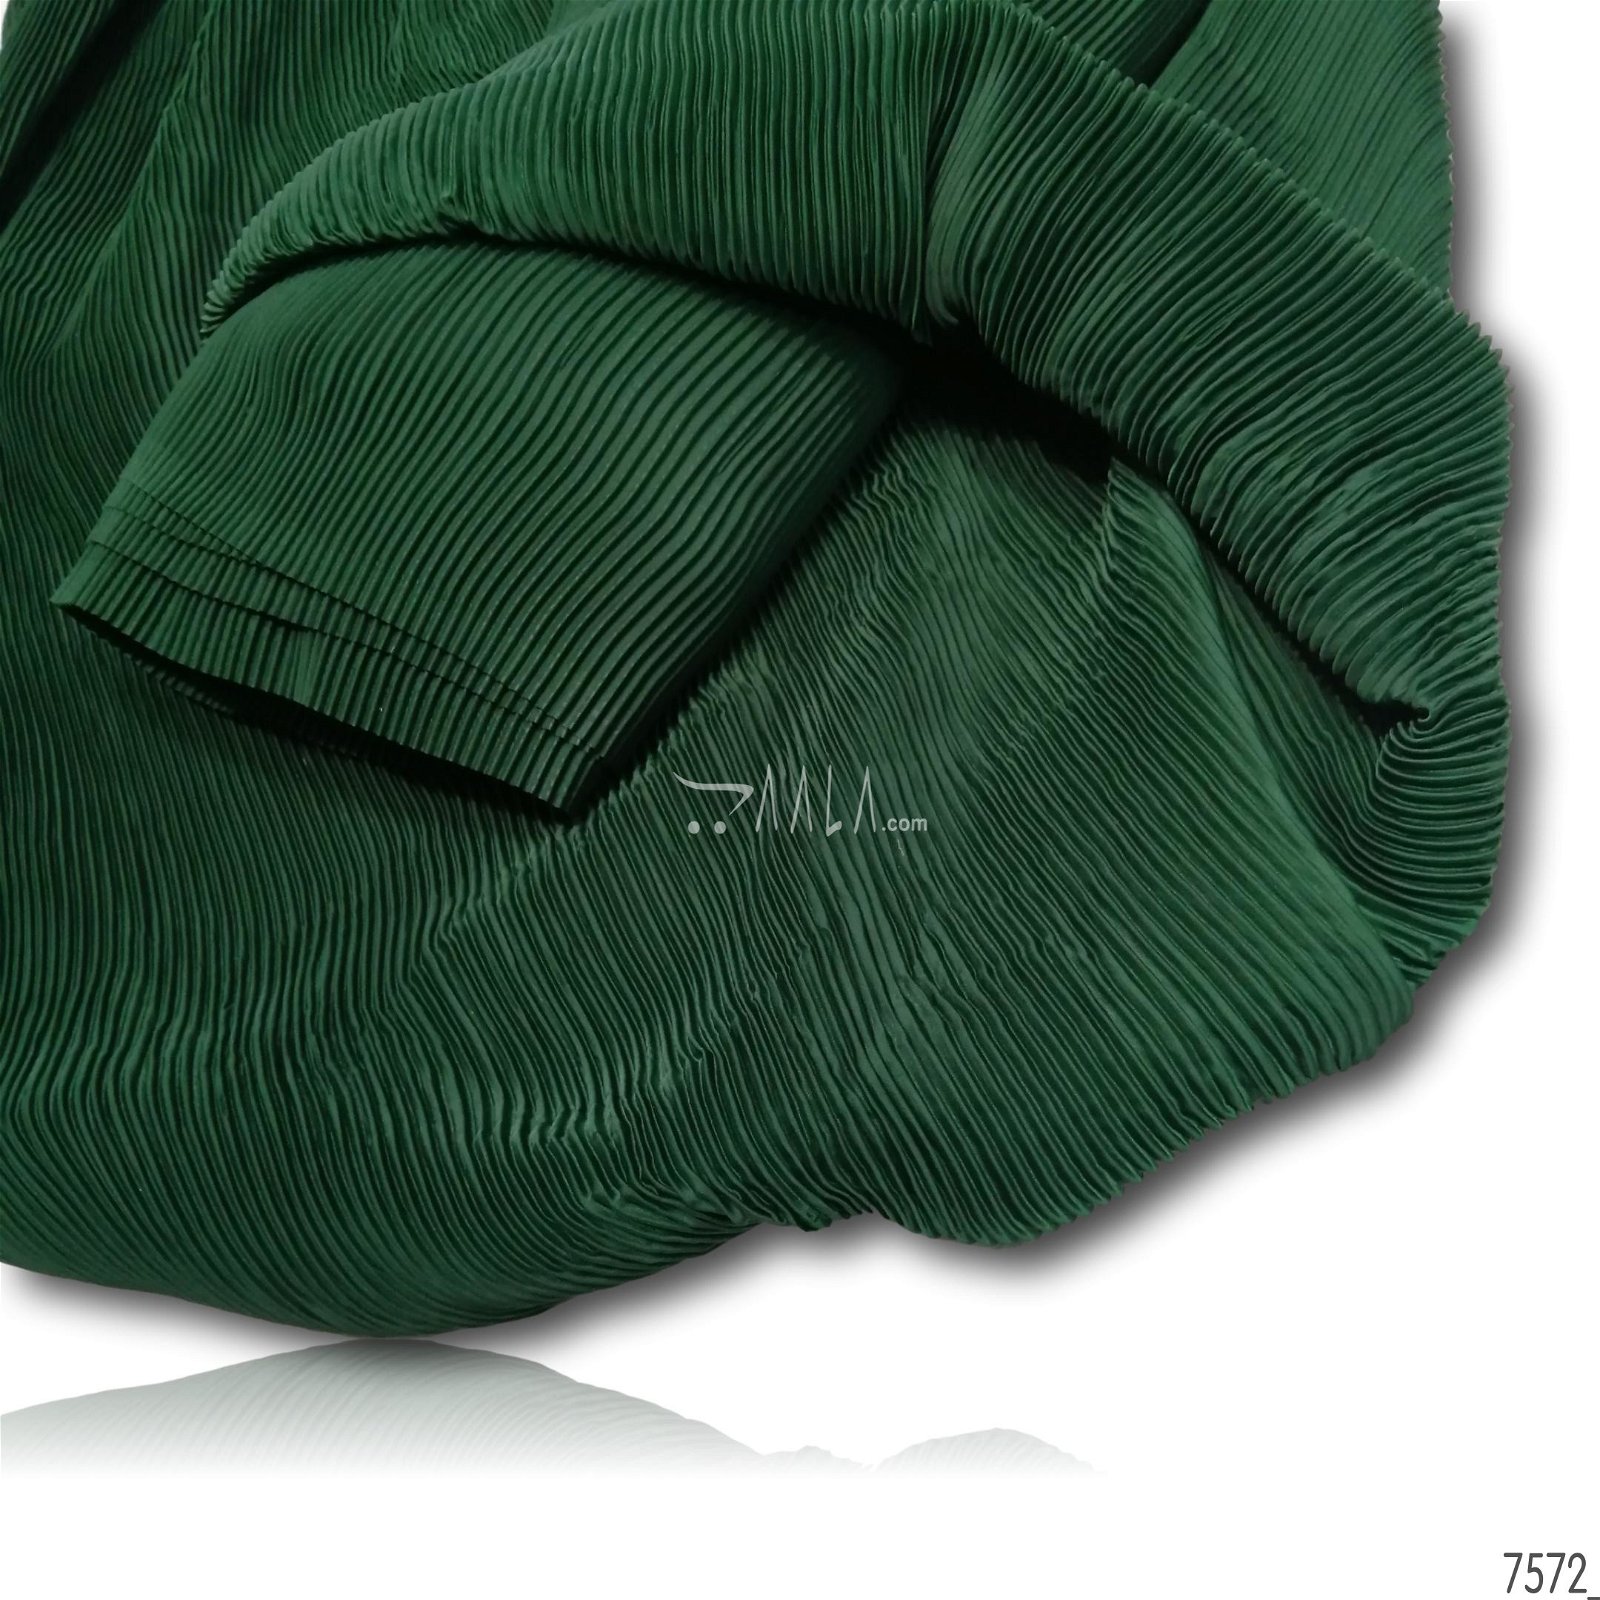 Pleated Satin-Georgette Poly-ester 44-Inches GREEN Per-Metre #7572
